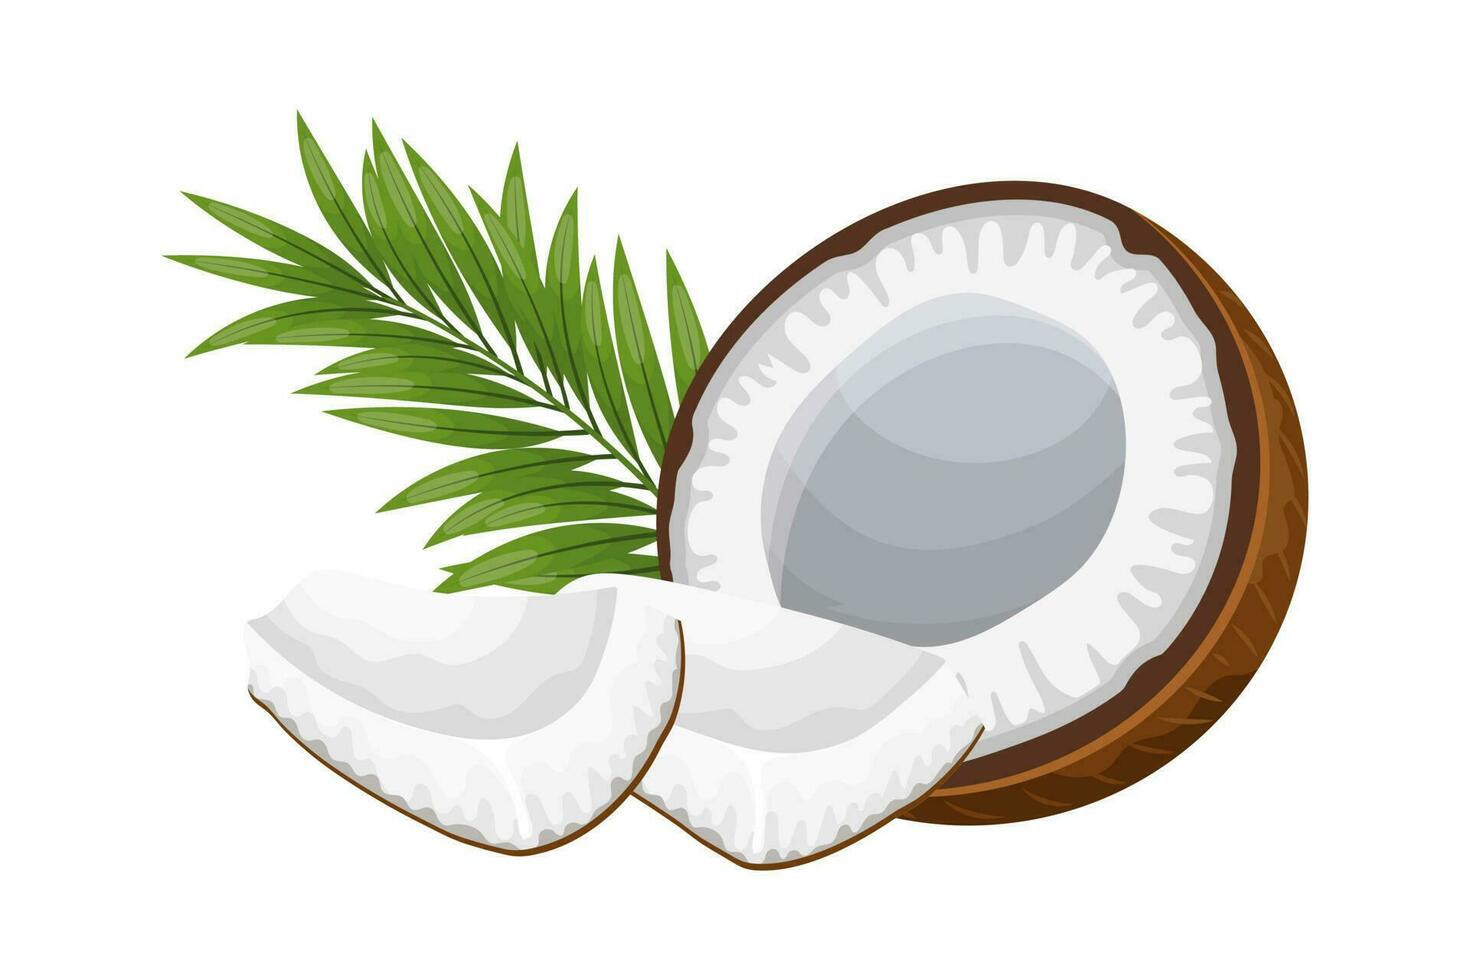 Coconuts and pieces of coconut with green leaves on a white background. Illustration, vector